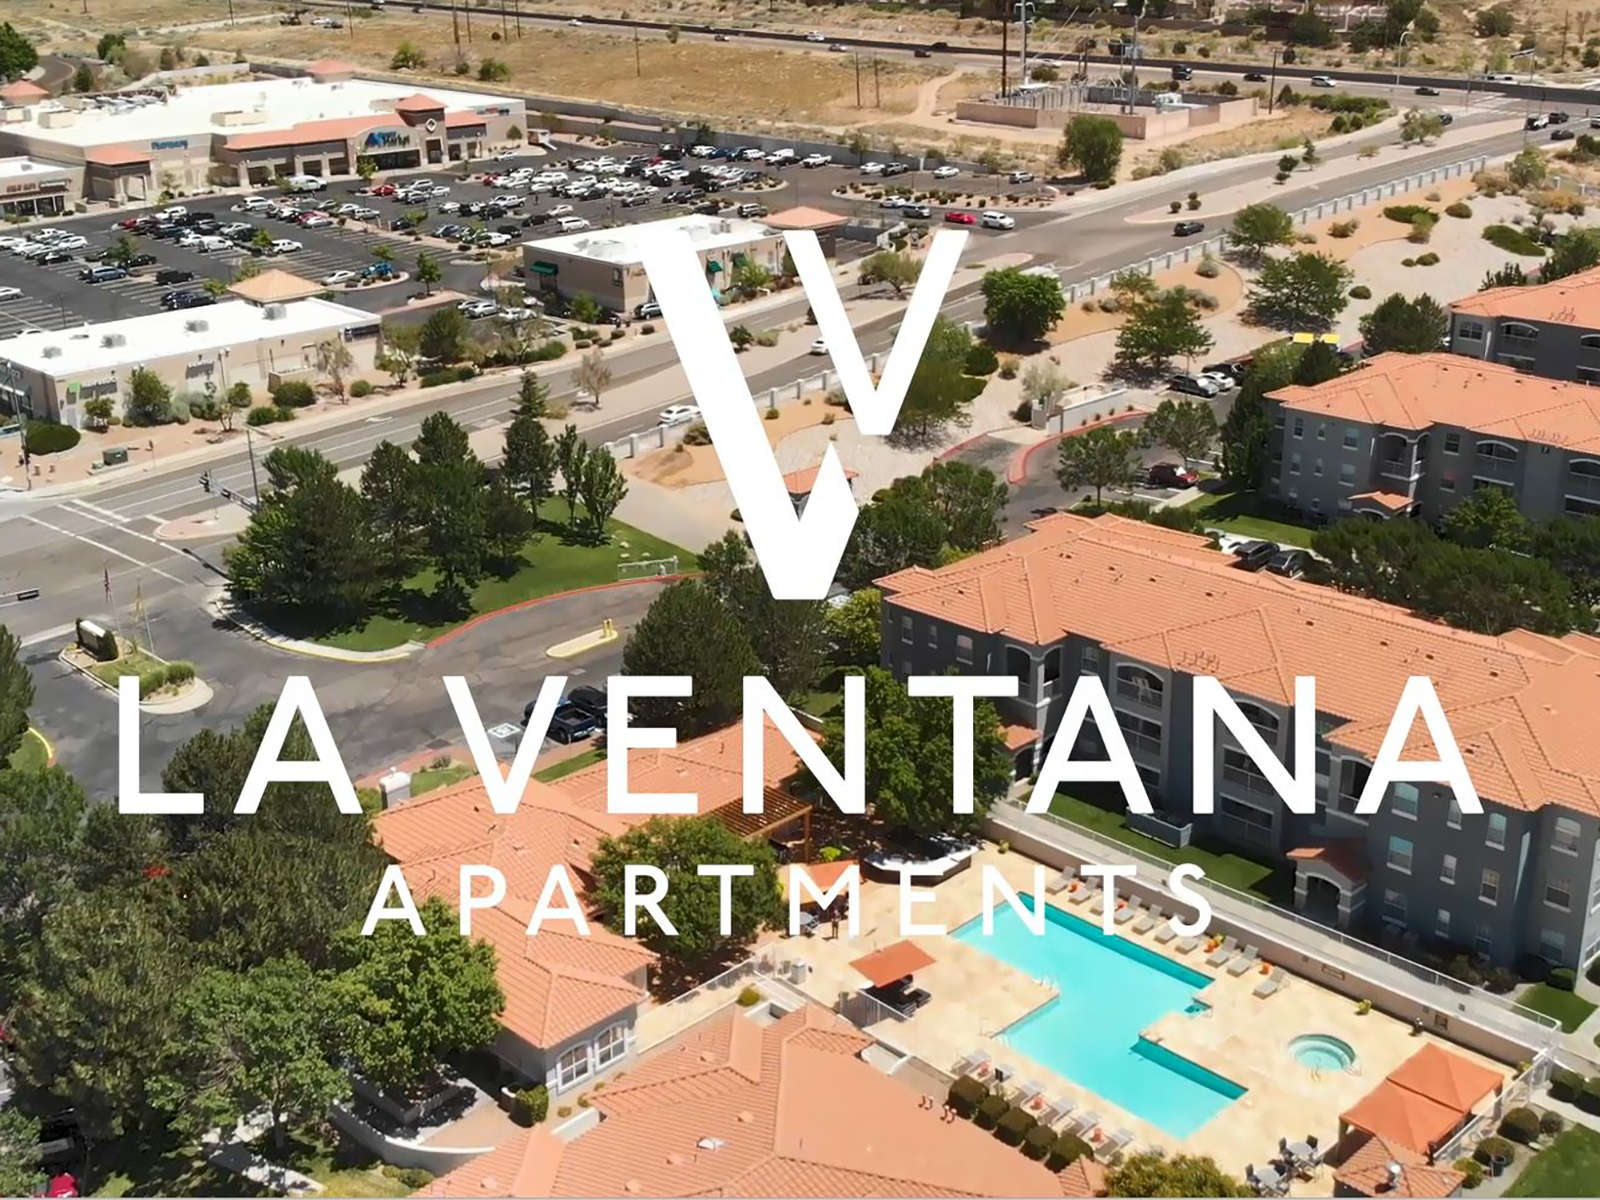 Discover the home that you’ve been waiting for at La Ventana Apartments in Albuquerque, NM. Experience our thriving community from the comfort of your very own home.